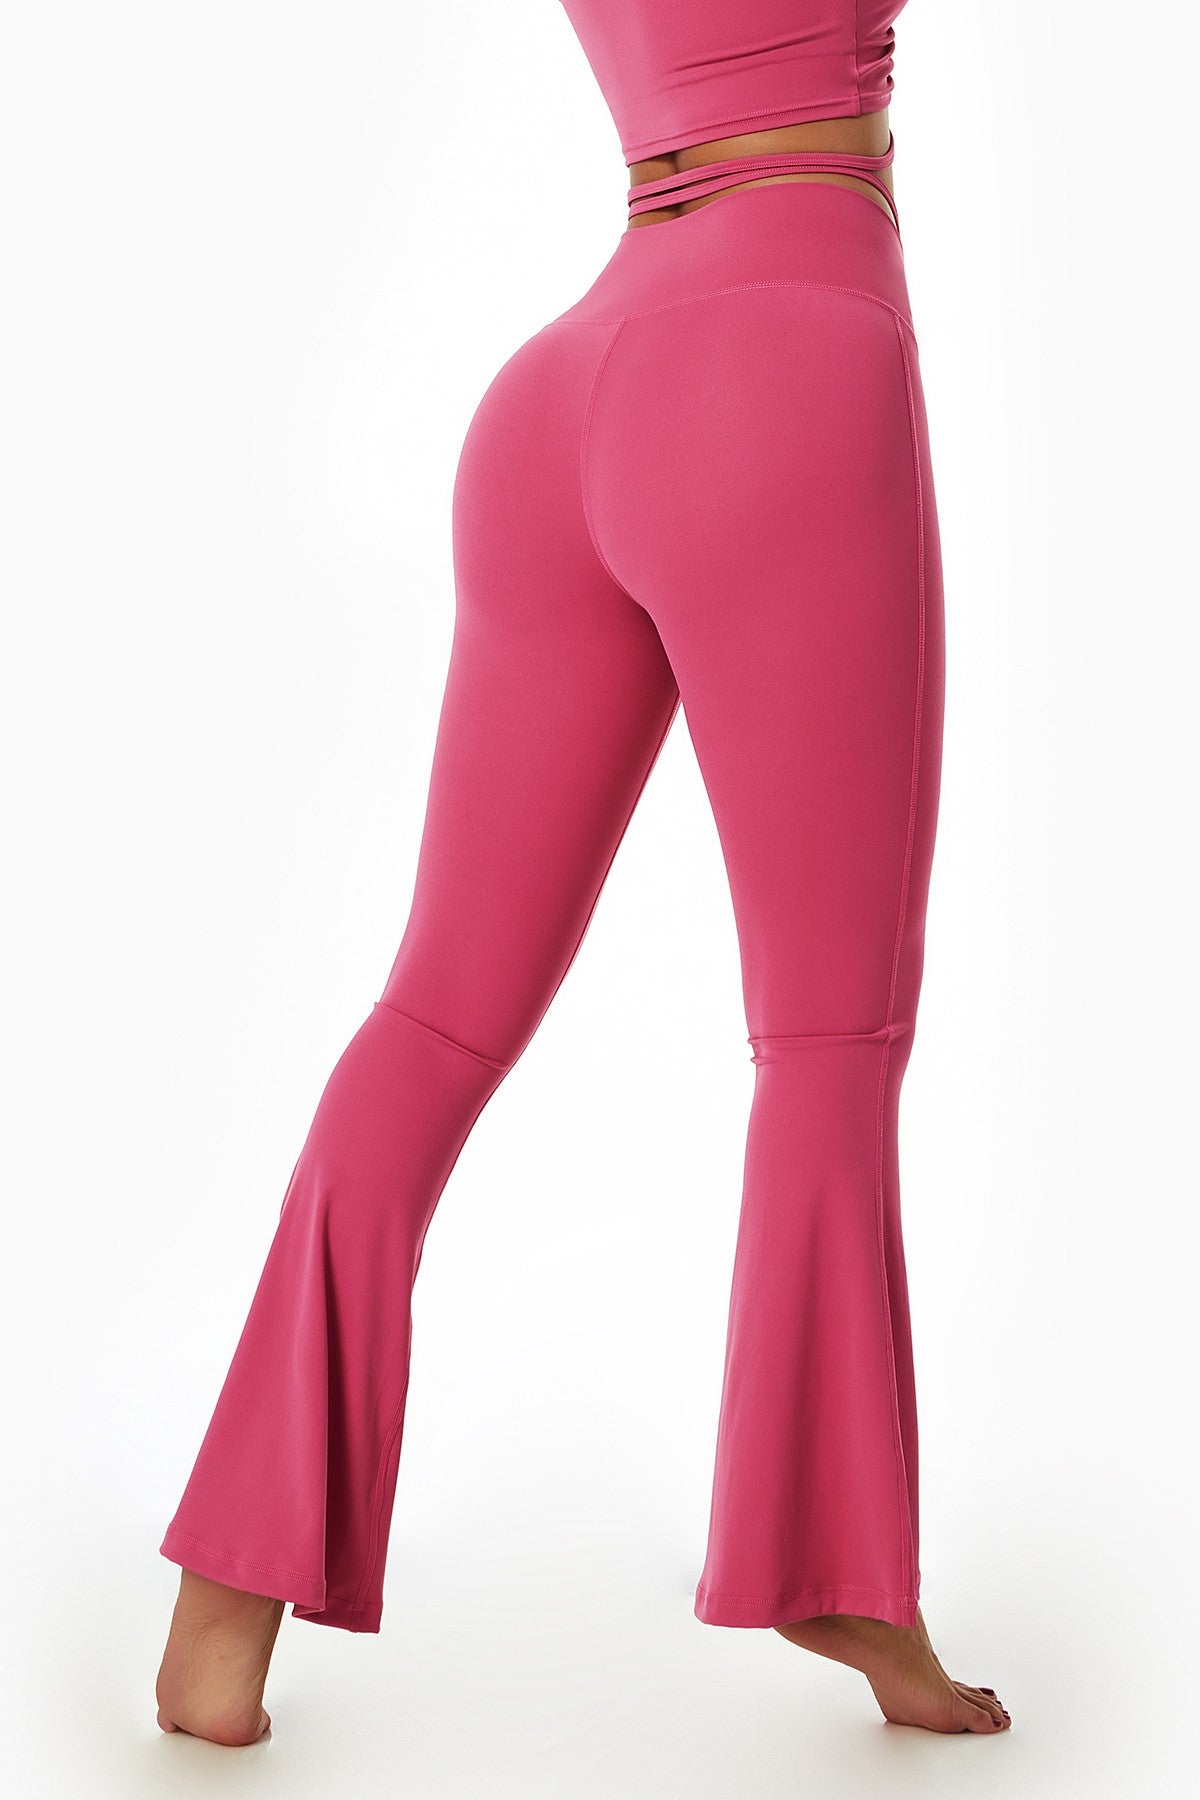 Metallic Pink Fuchsia Crushed Velvet Flare Leggings Customizable High  Waisted Tights Bell Bottom Pants 70's Spandex Size S M L XL Short Long -   Canada